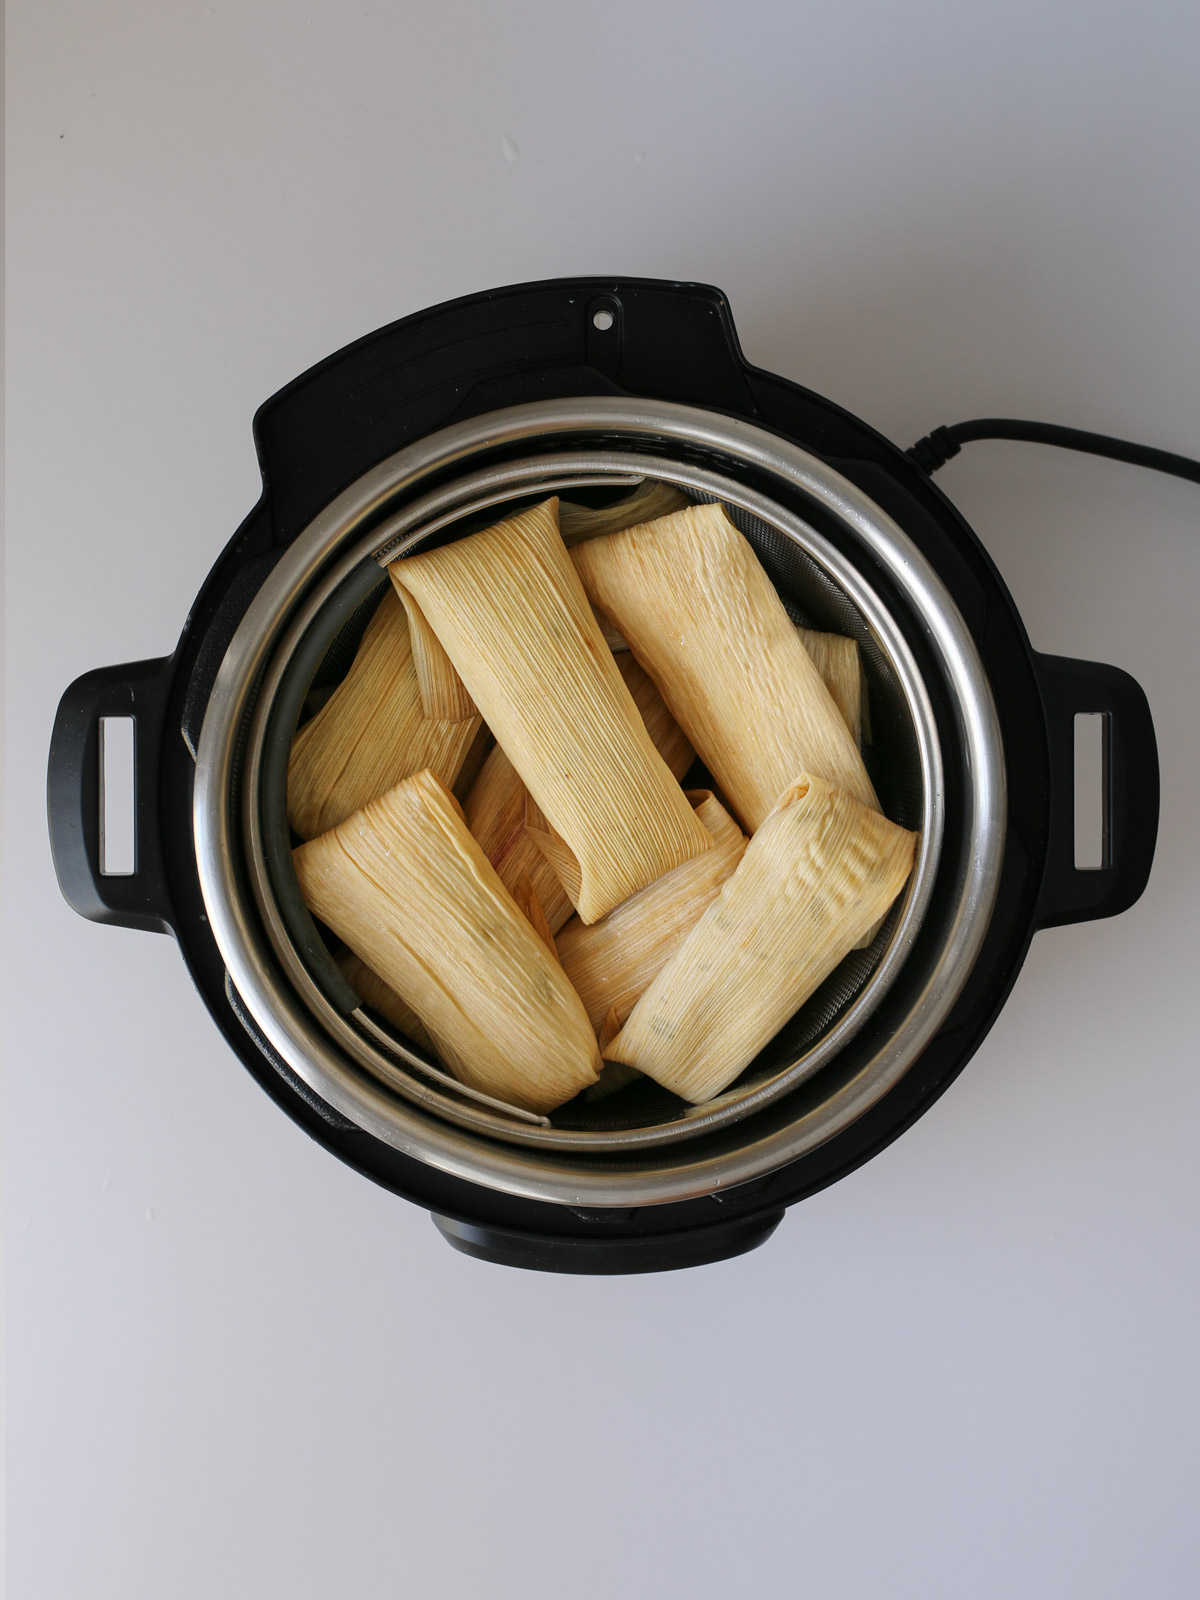 tamales piled into the steamer basket.